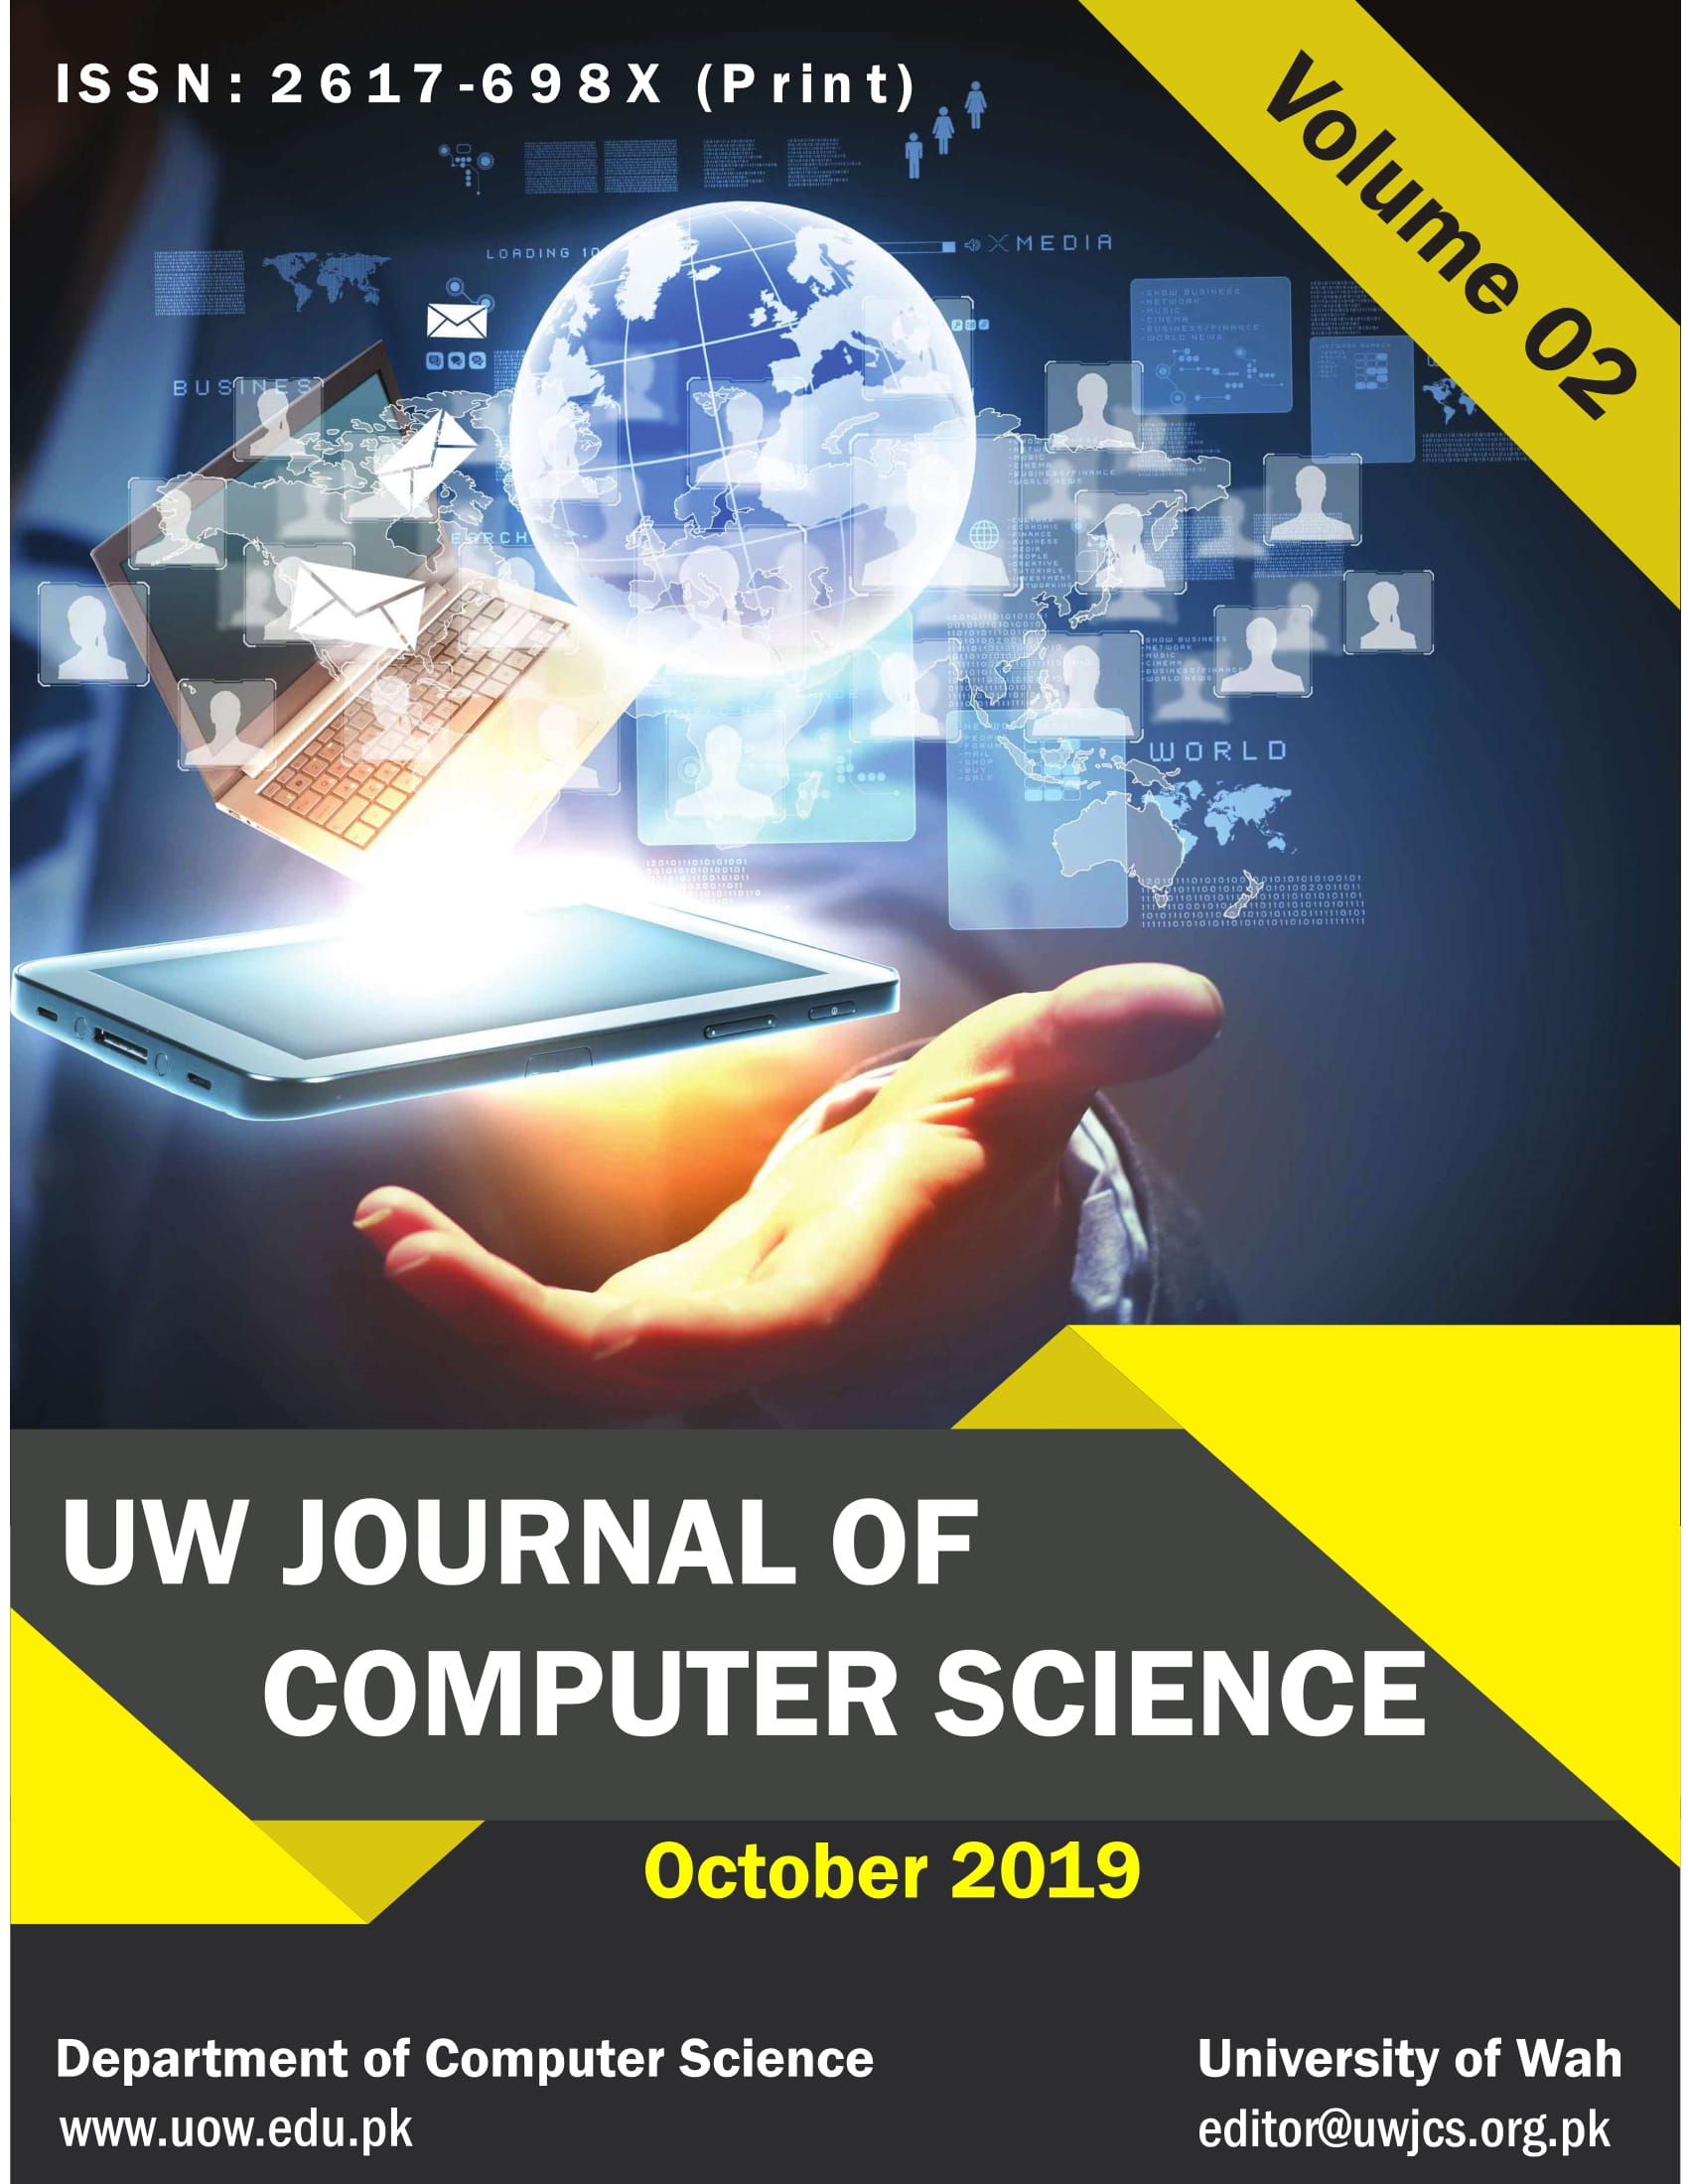 					View Vol. 2 No. 1 (2019): University of Wah Journal of Computer Science
				